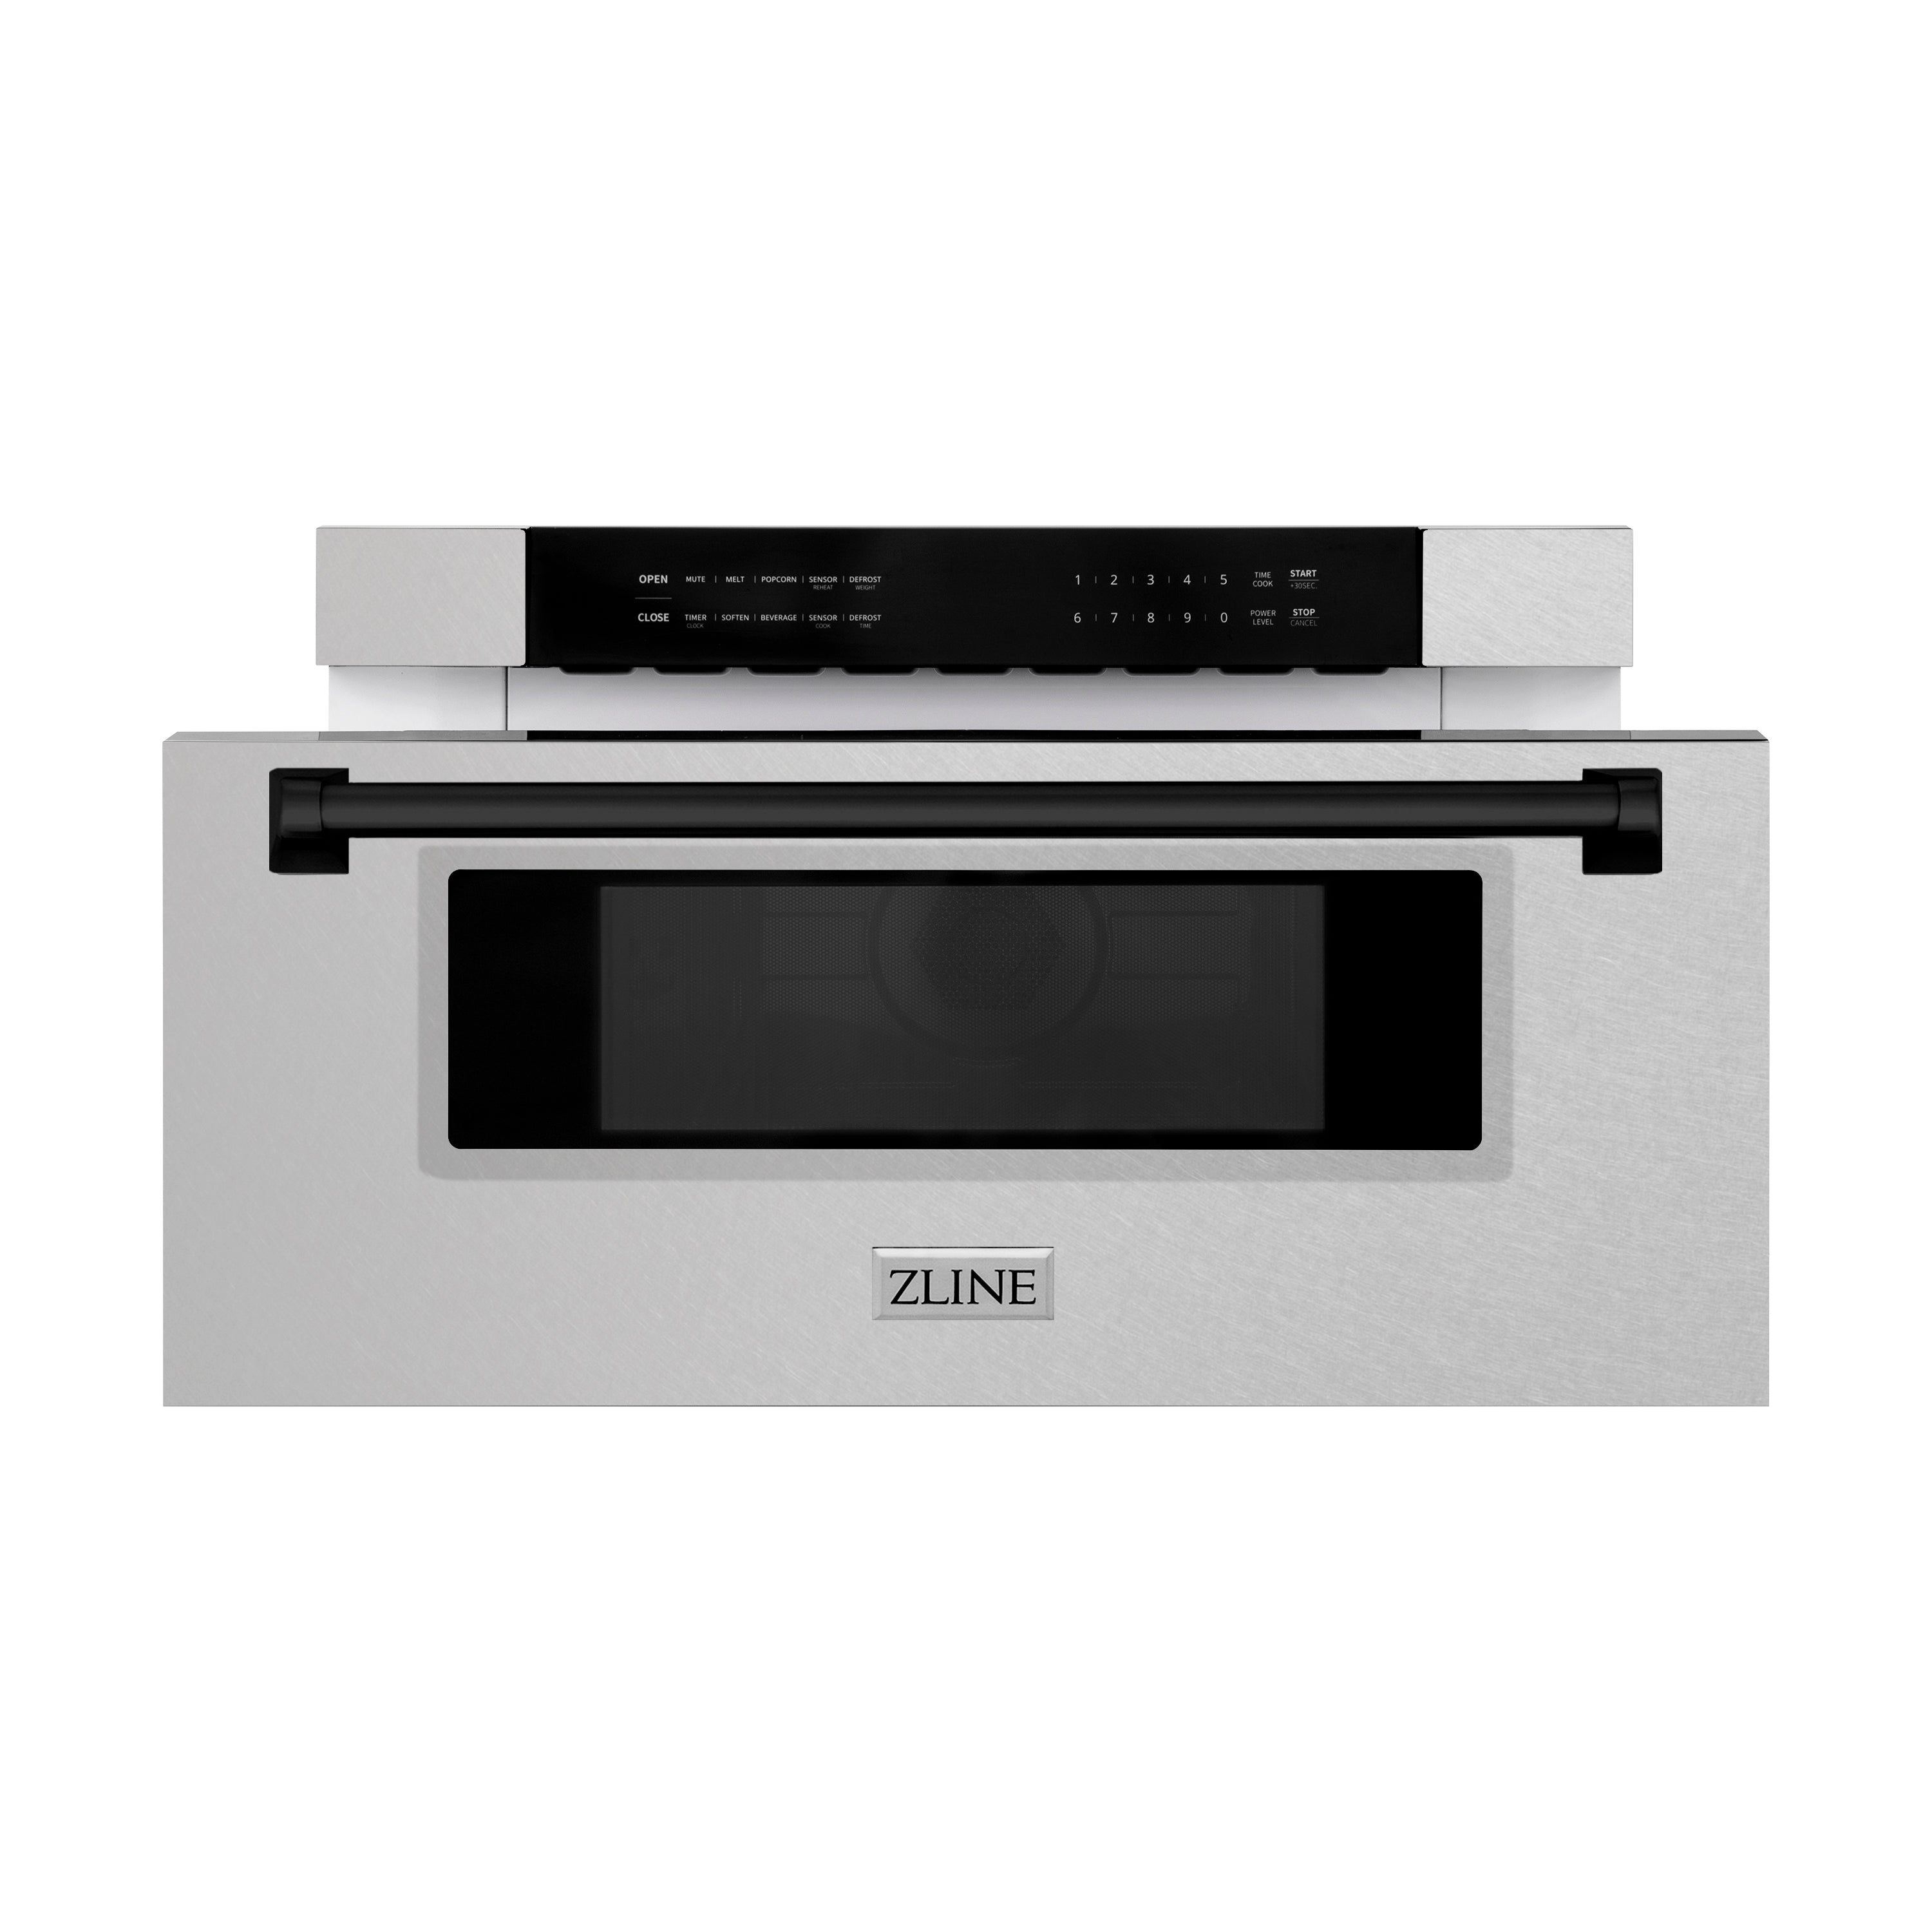 ZLINE Autograph Edition 30 in. 1.2 cu. ft. Built-In Microwave Drawer in Fingerprint Resistant Stainless Steel with Matte Black Accents (MWDZ-30-SS-MB) Front View Drawer Open